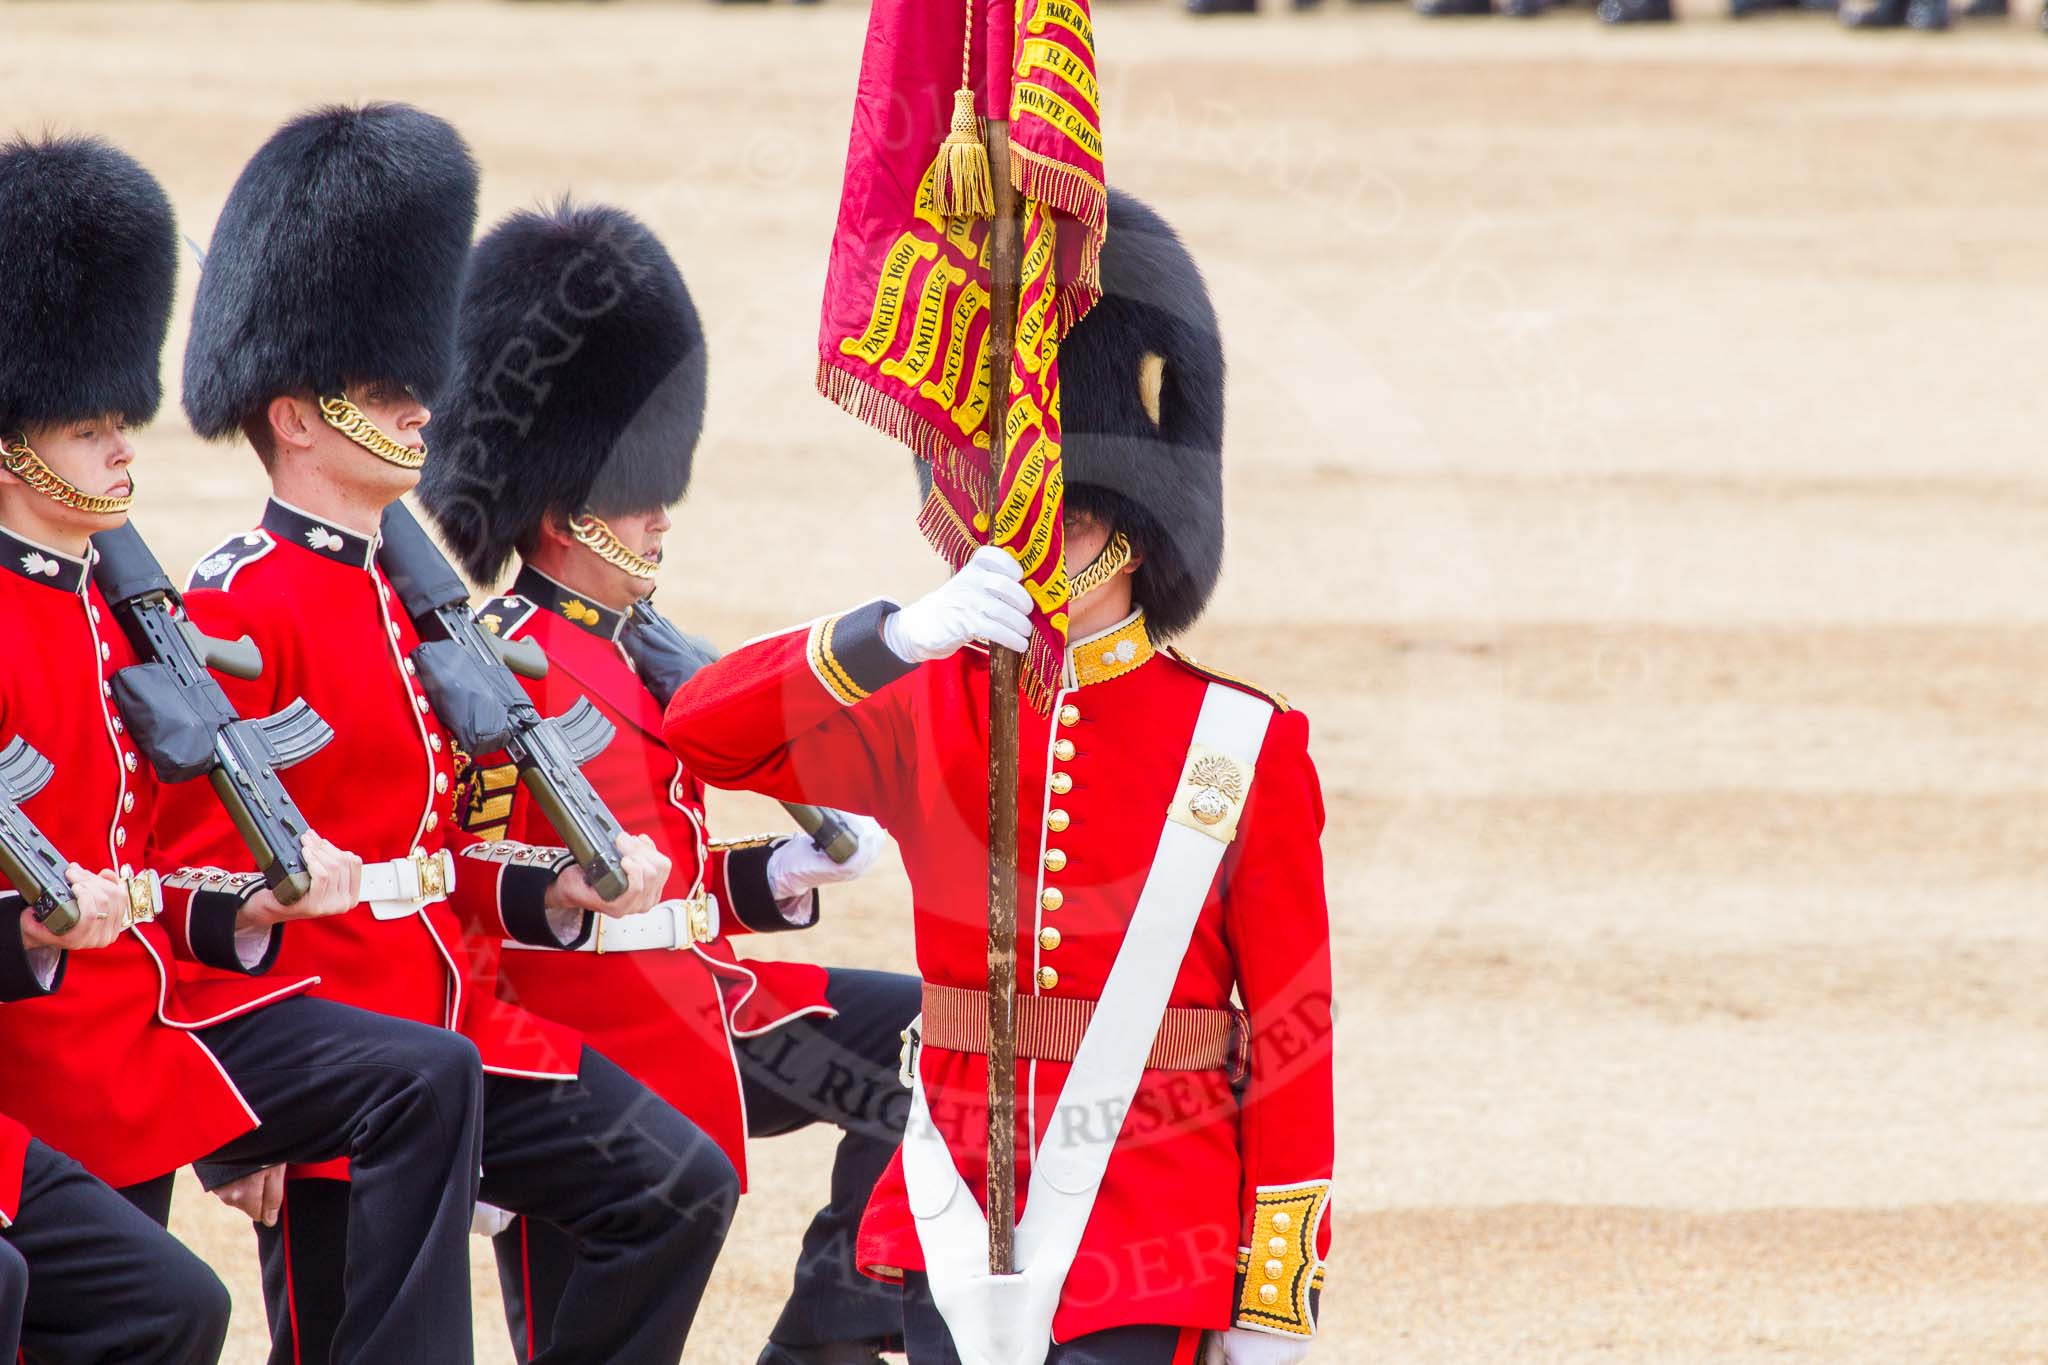 Trooping the Colour 2014.
Horse Guards Parade, Westminster,
London SW1A,

United Kingdom,
on 14 June 2014 at 11:36, image #616